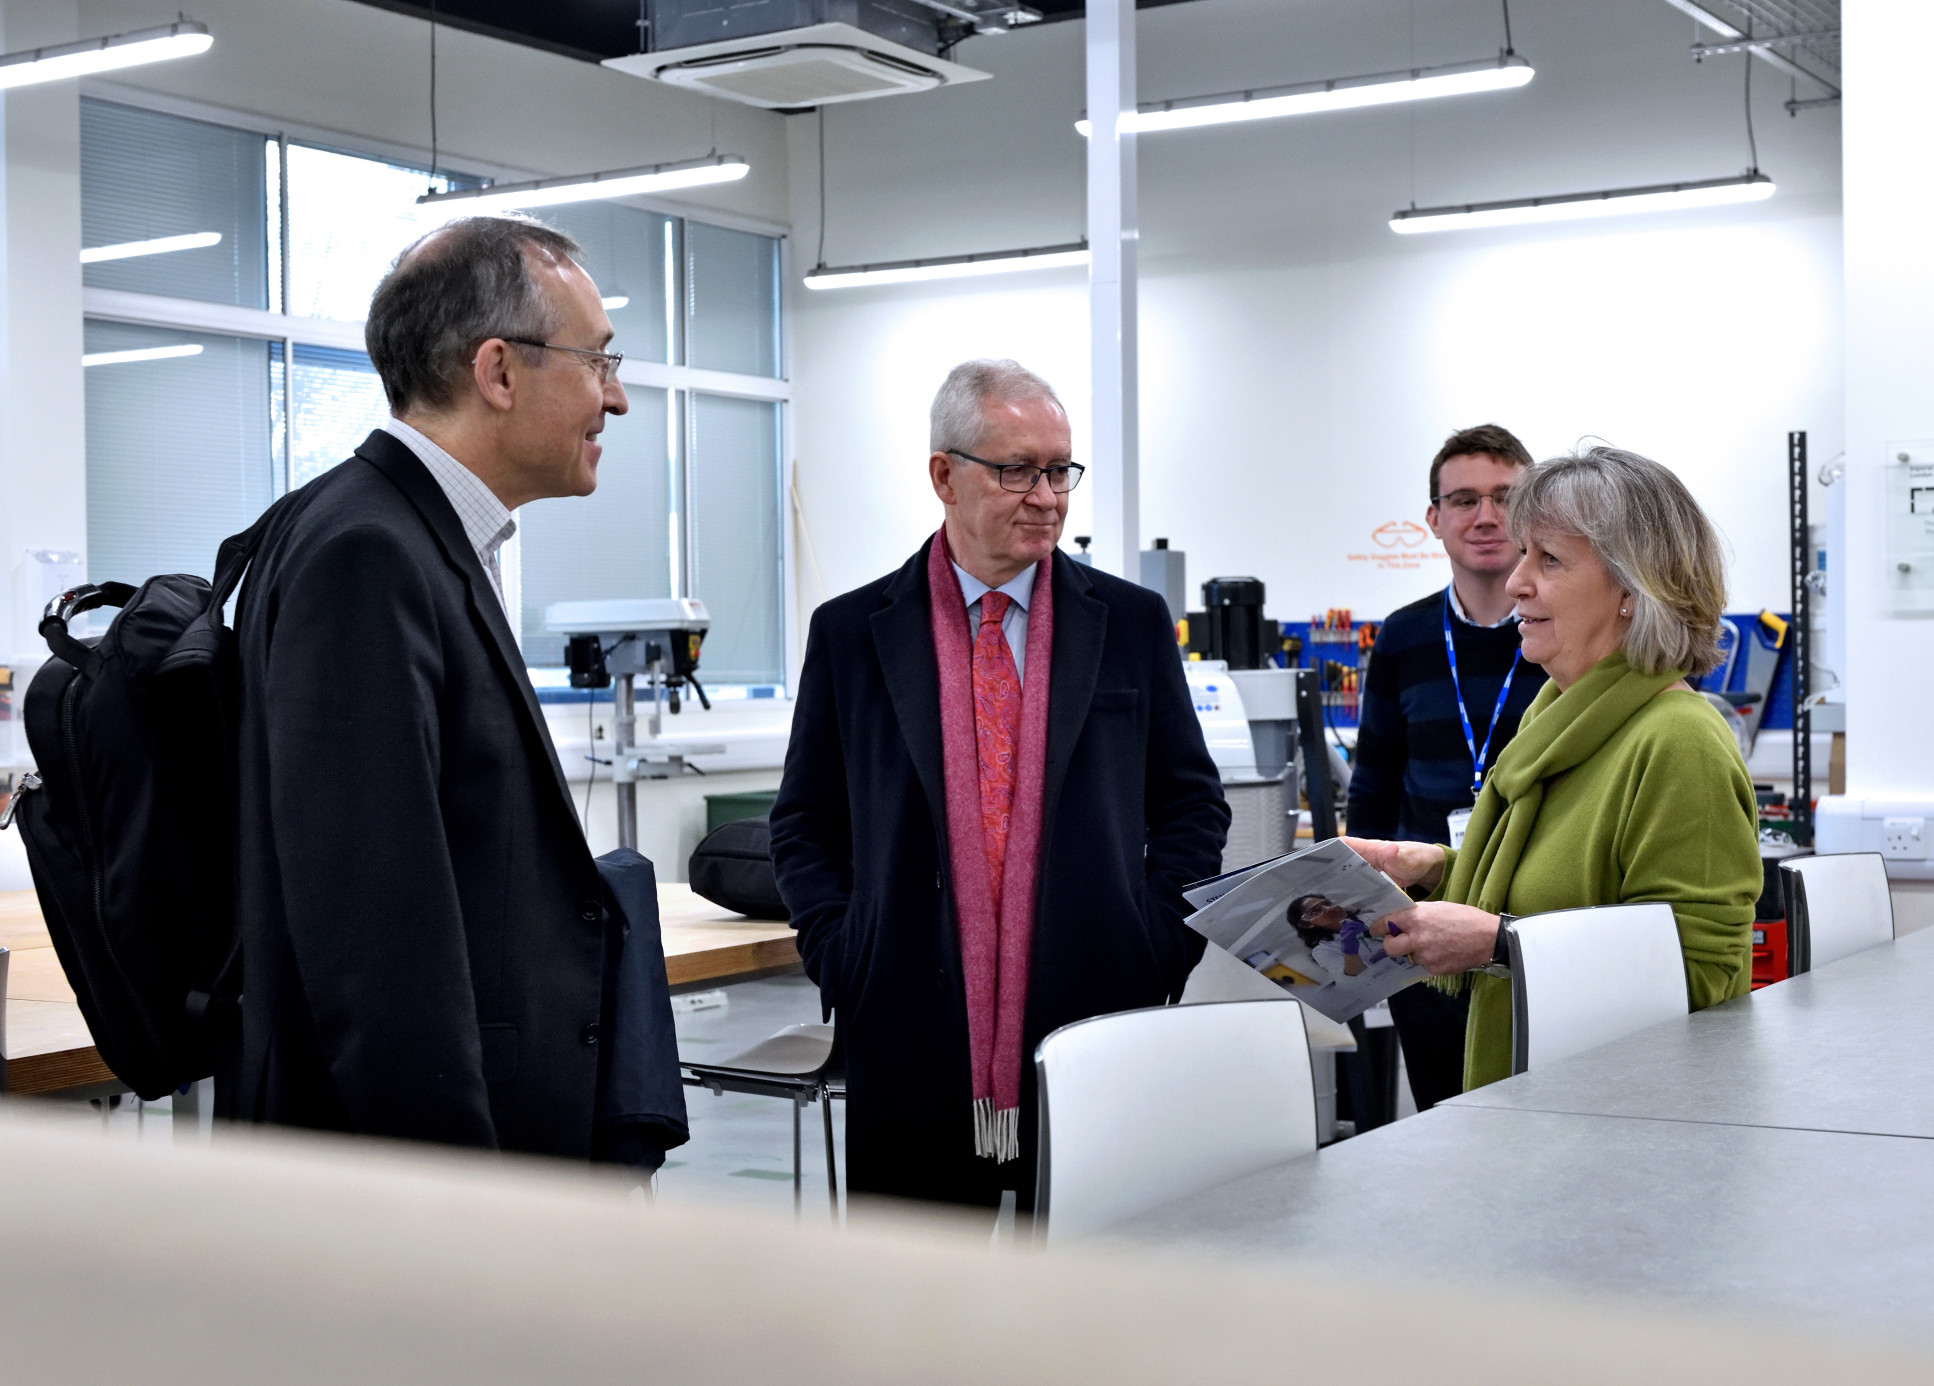 Andy Slaughter MP speaks to Professor Maggie Dallman in The Invention Rooms